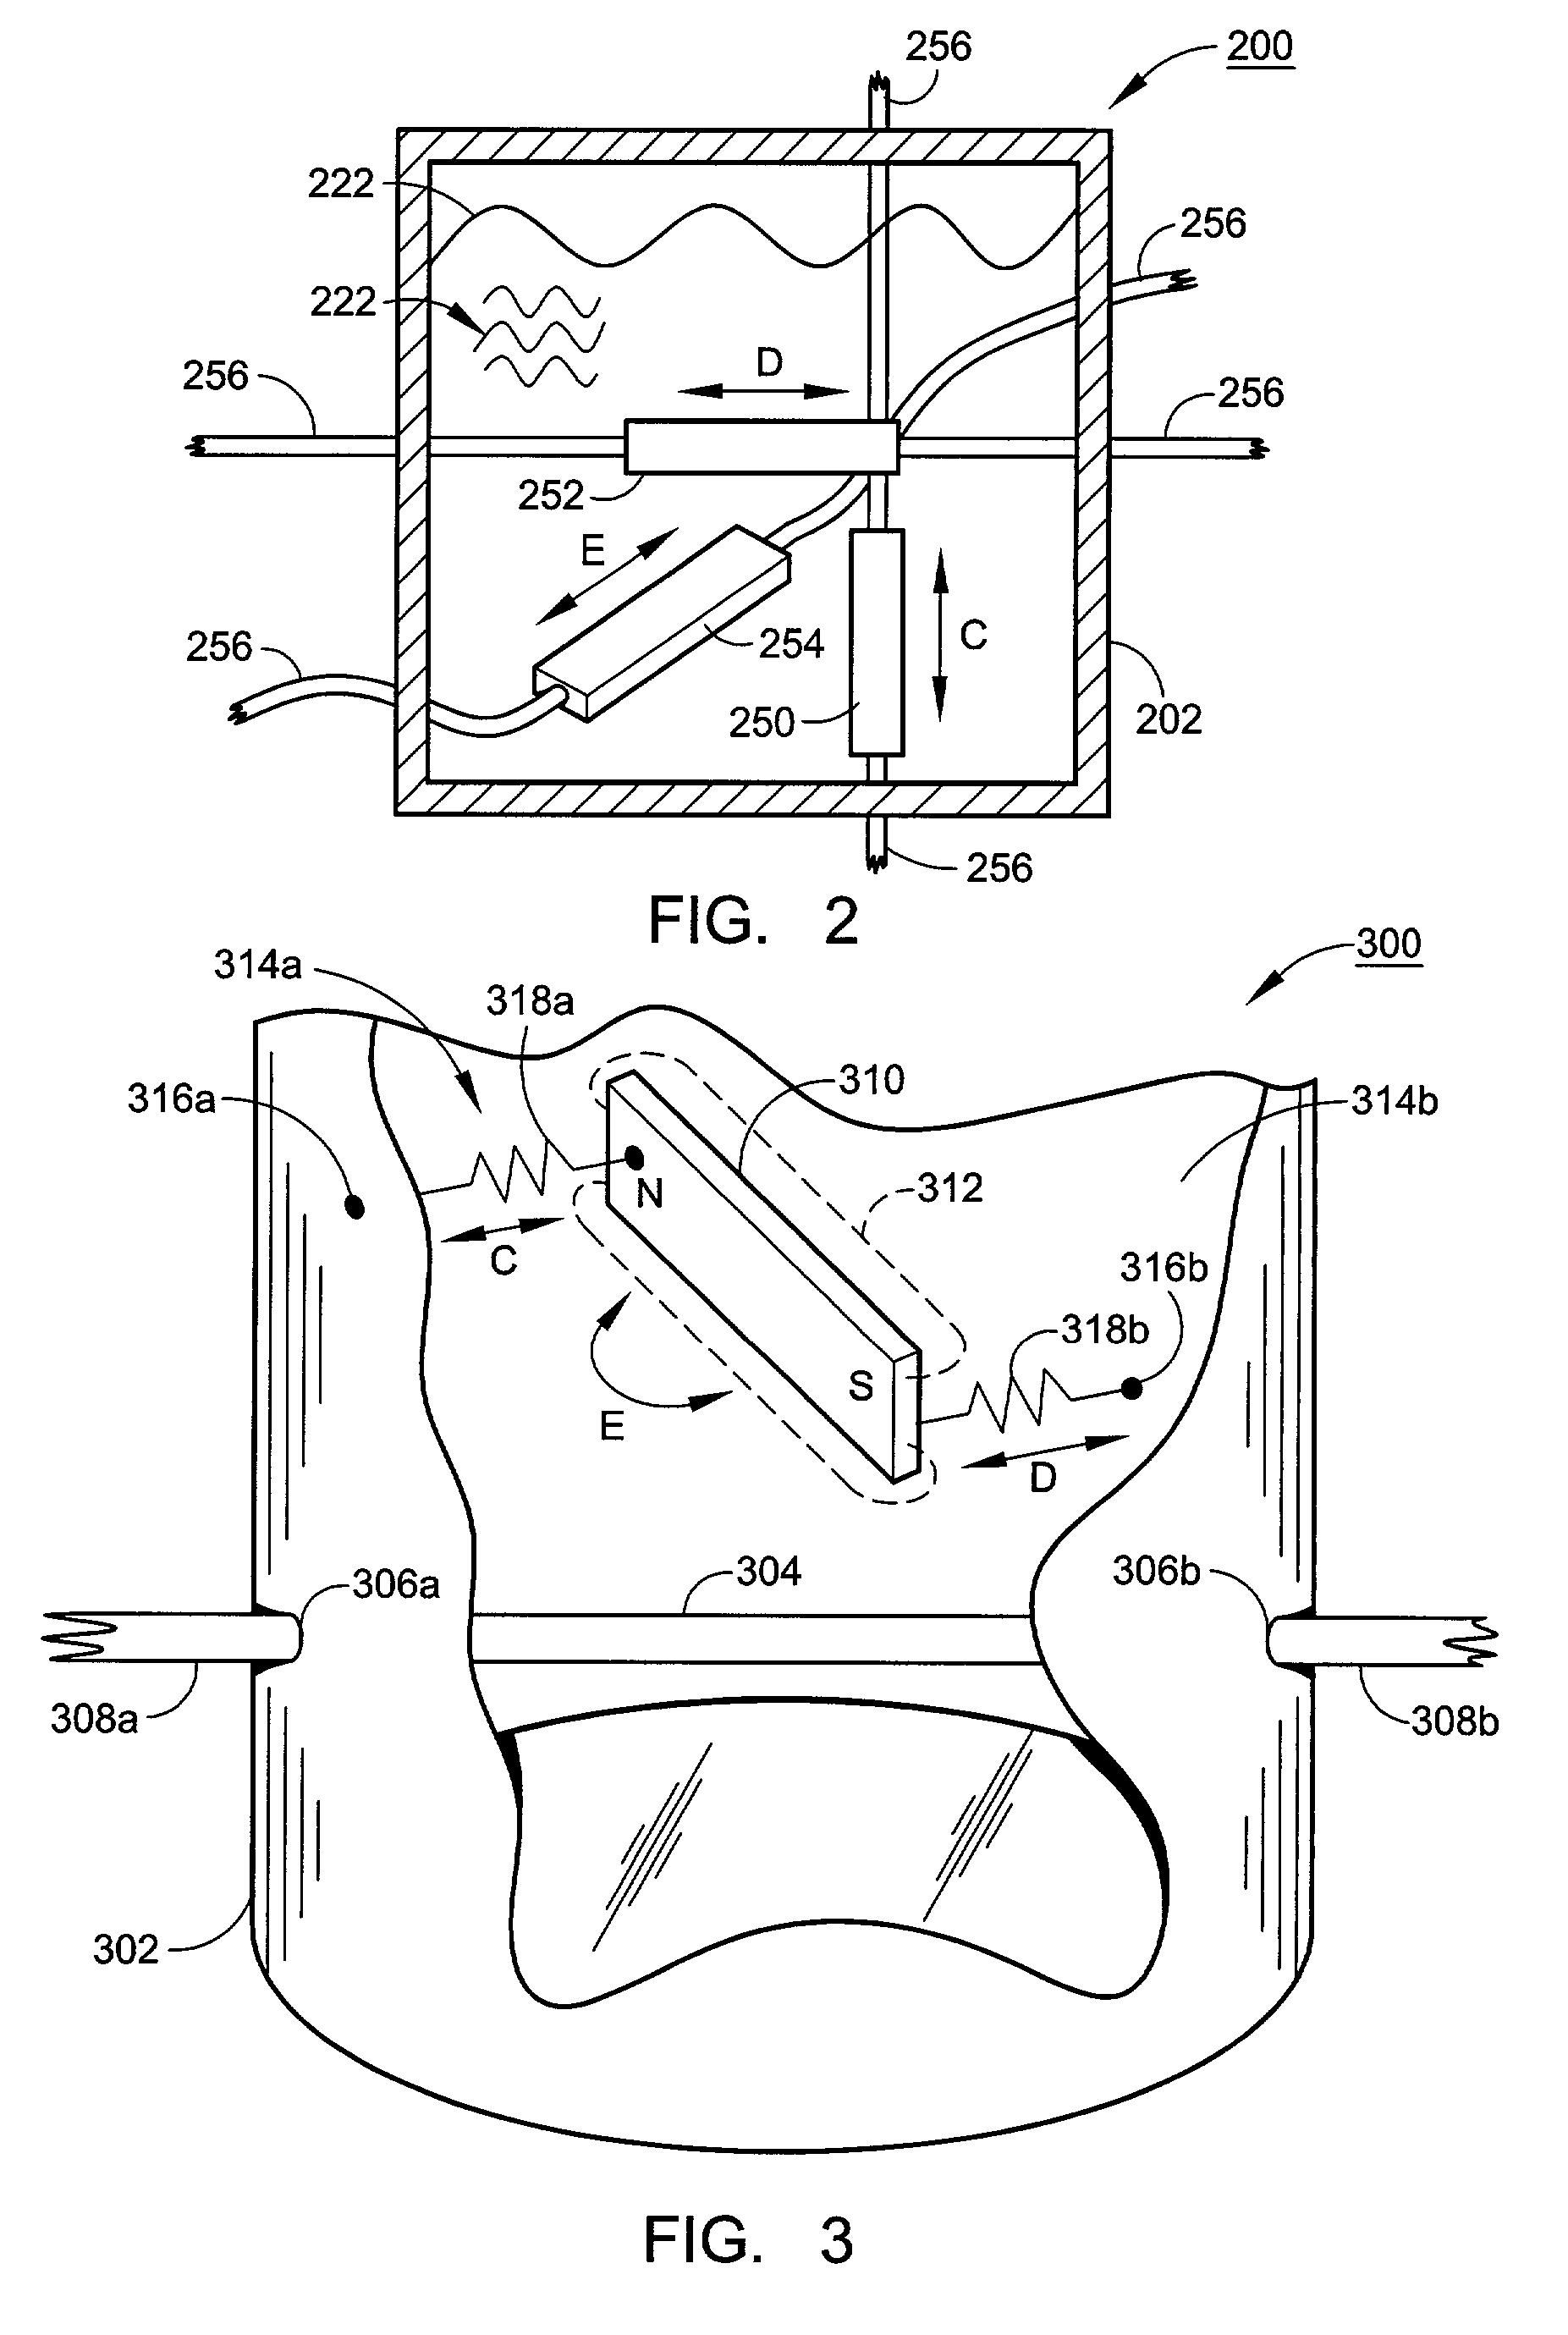 Transducer for converting between mechanical vibration and electrical signal